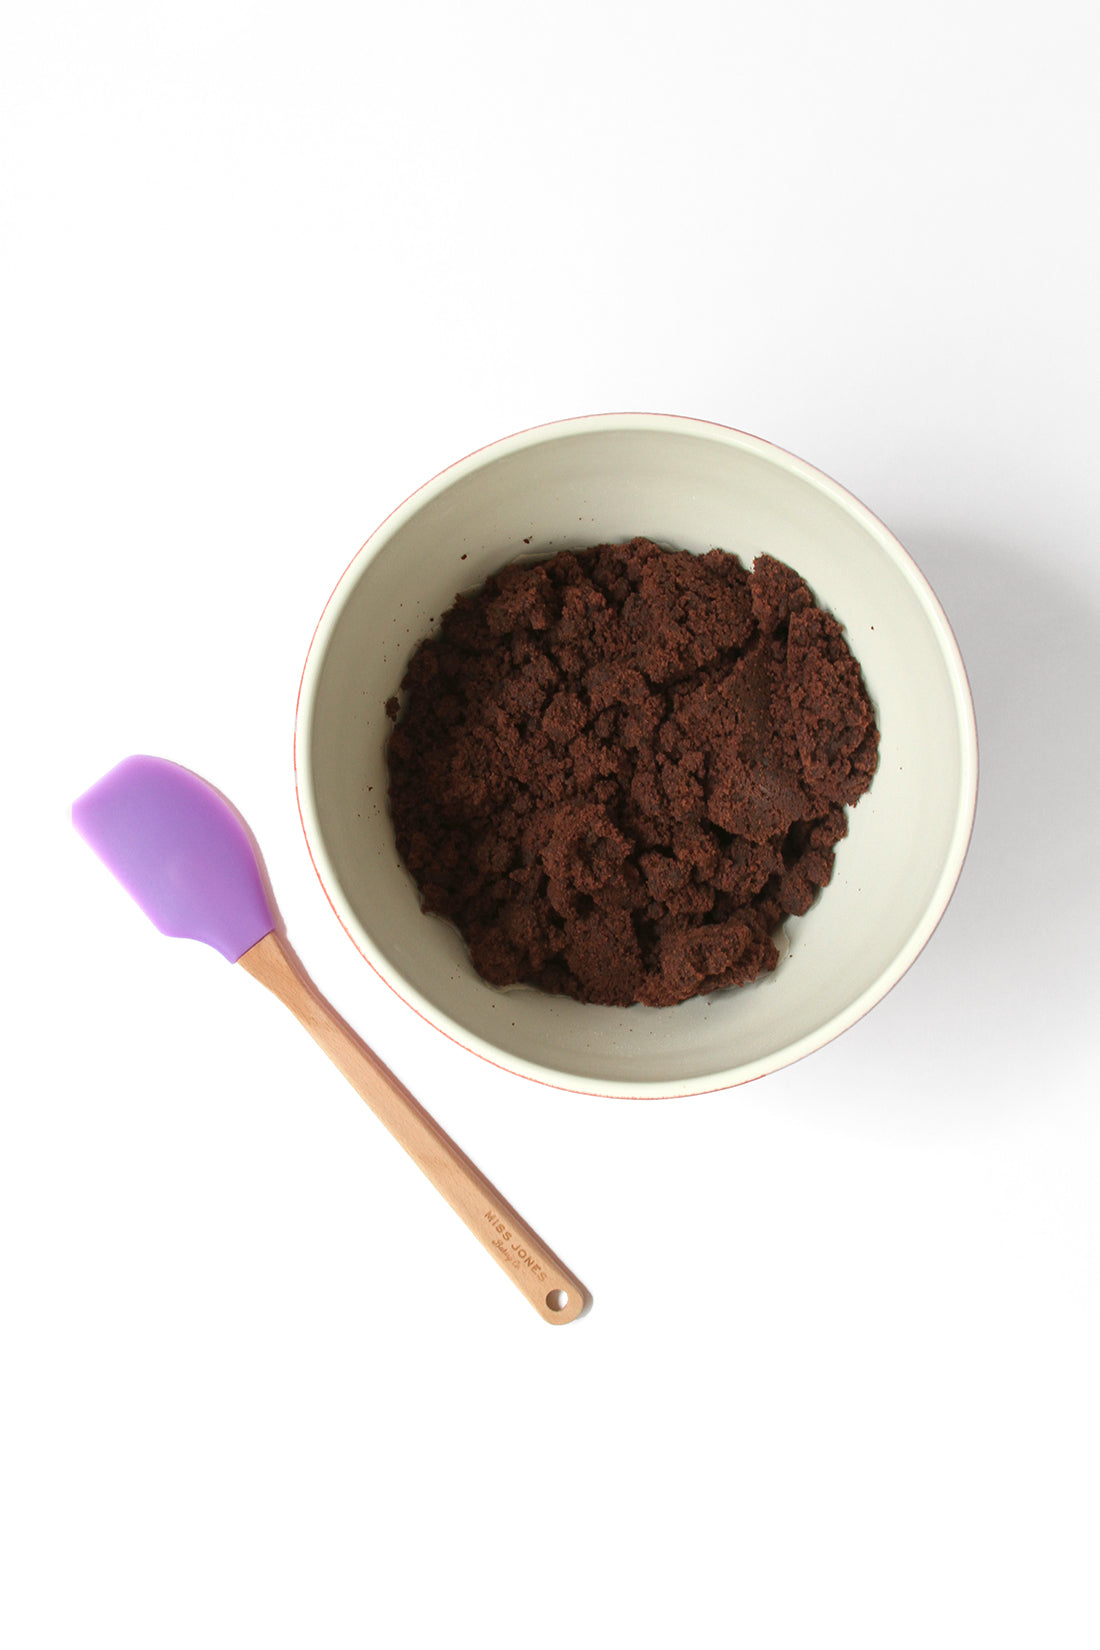 Image of Miss Jones Baking Co Brownie Batter Crinkle Cookie Sandwiches batter in mixing bowl next to purple spatula